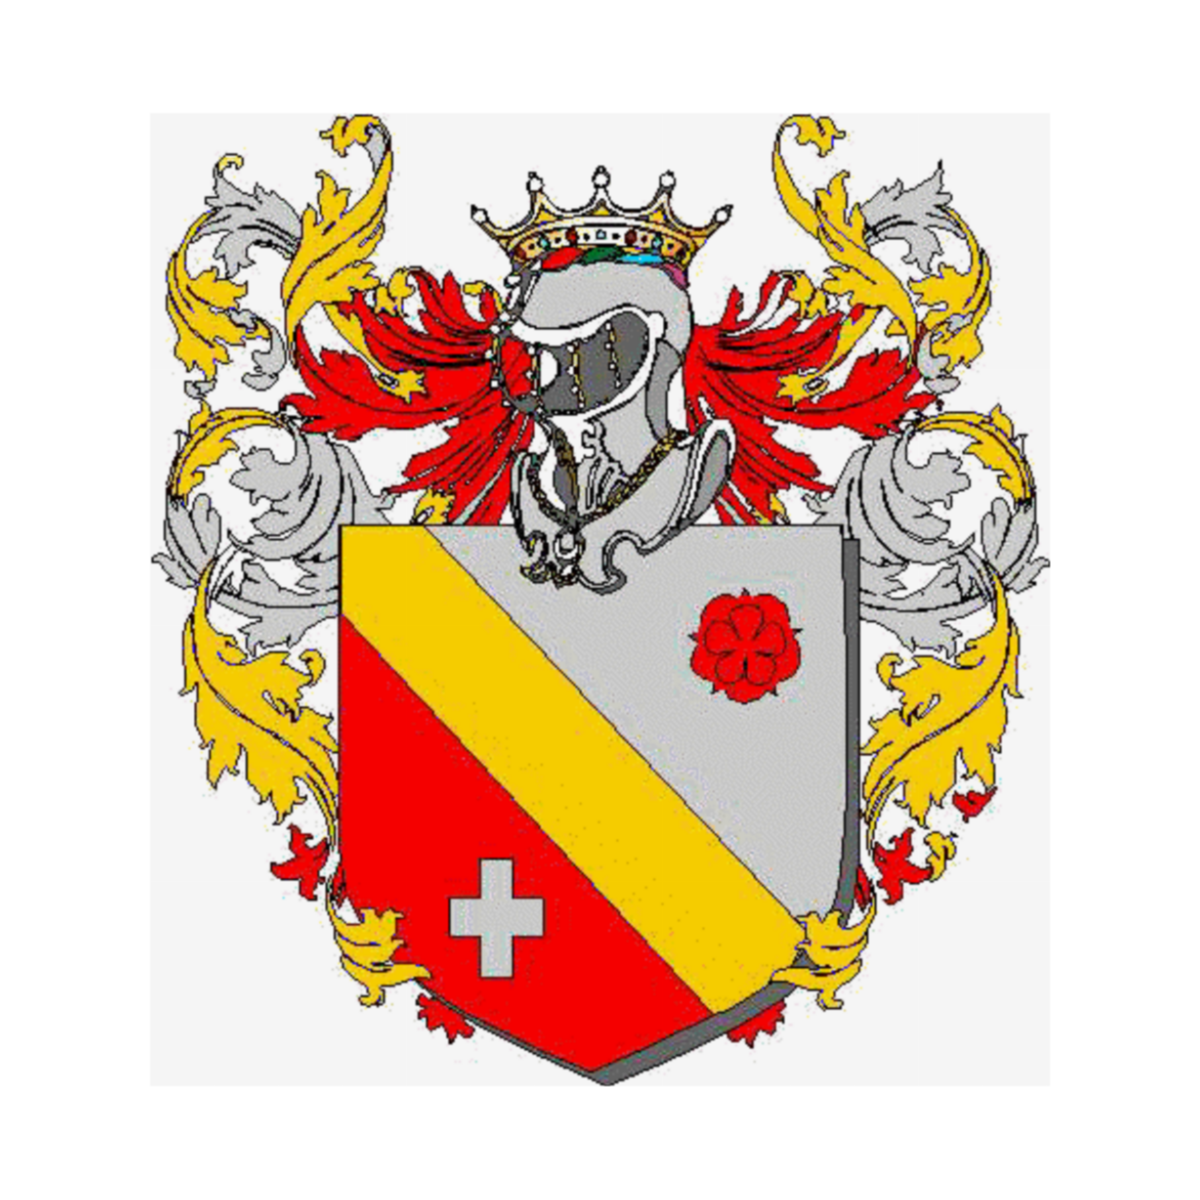 Coat of arms of family Moreira